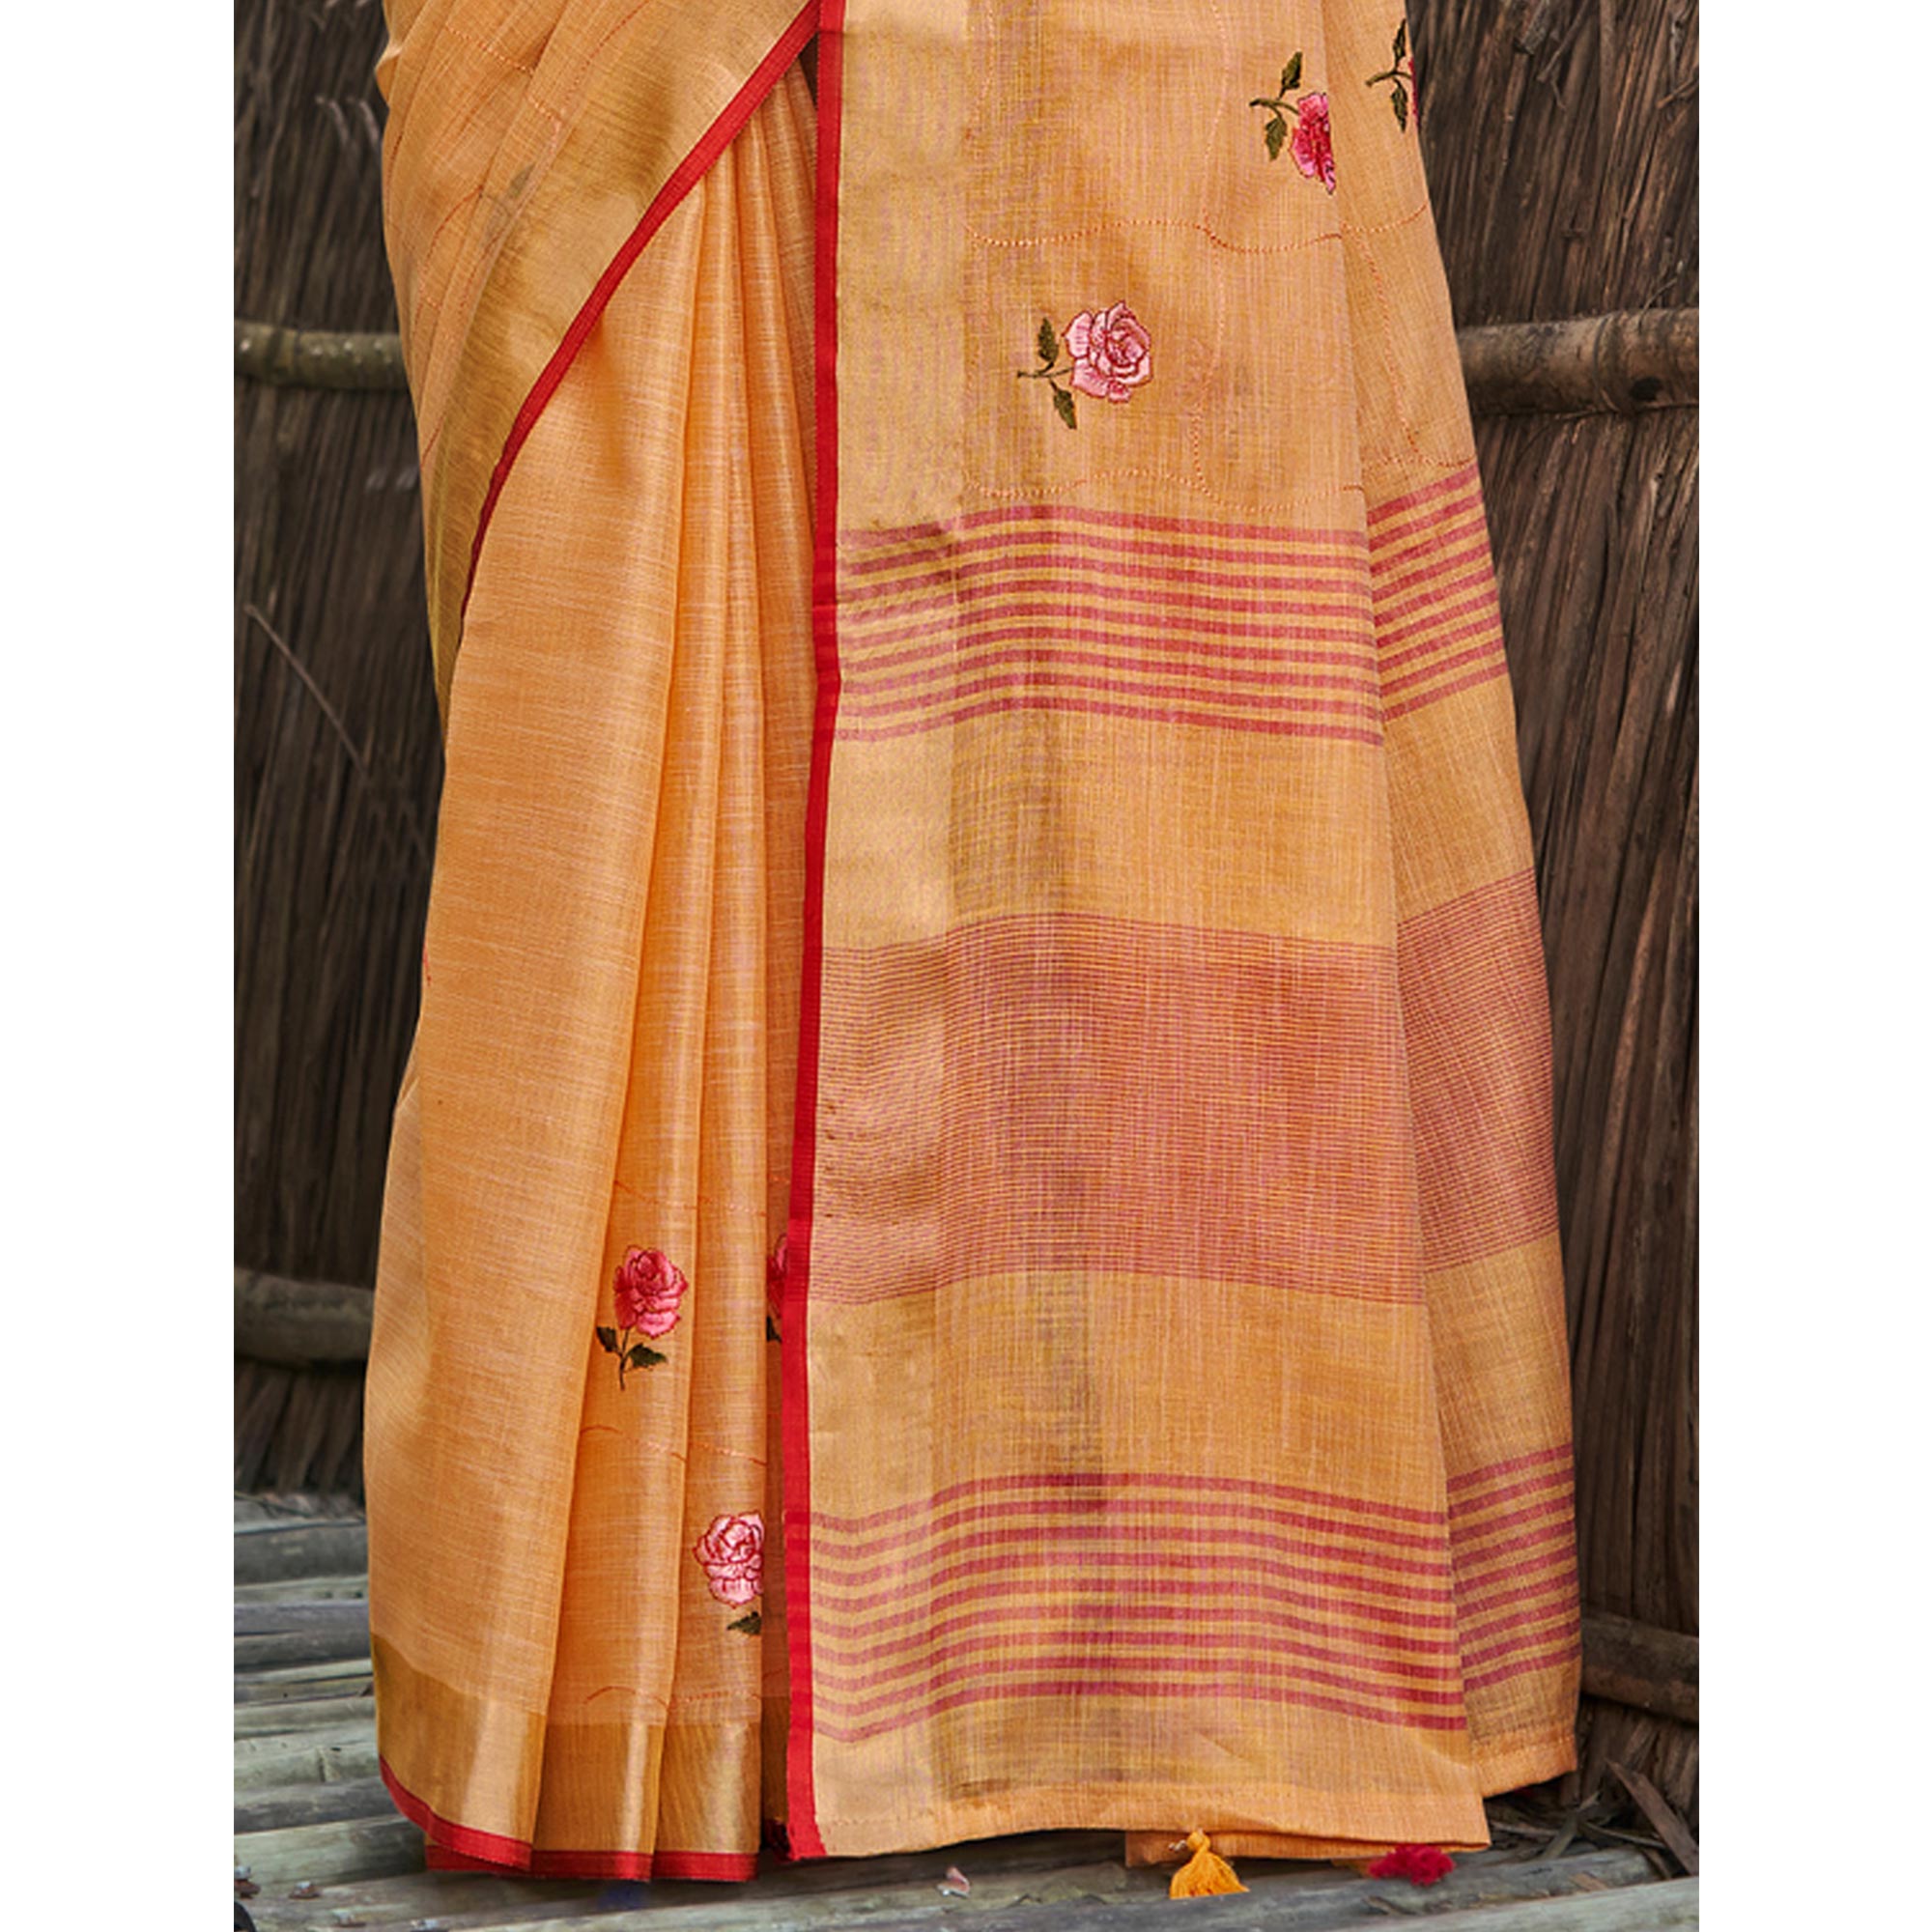 Orange Floral Embroidered Linen Saree With Tassels